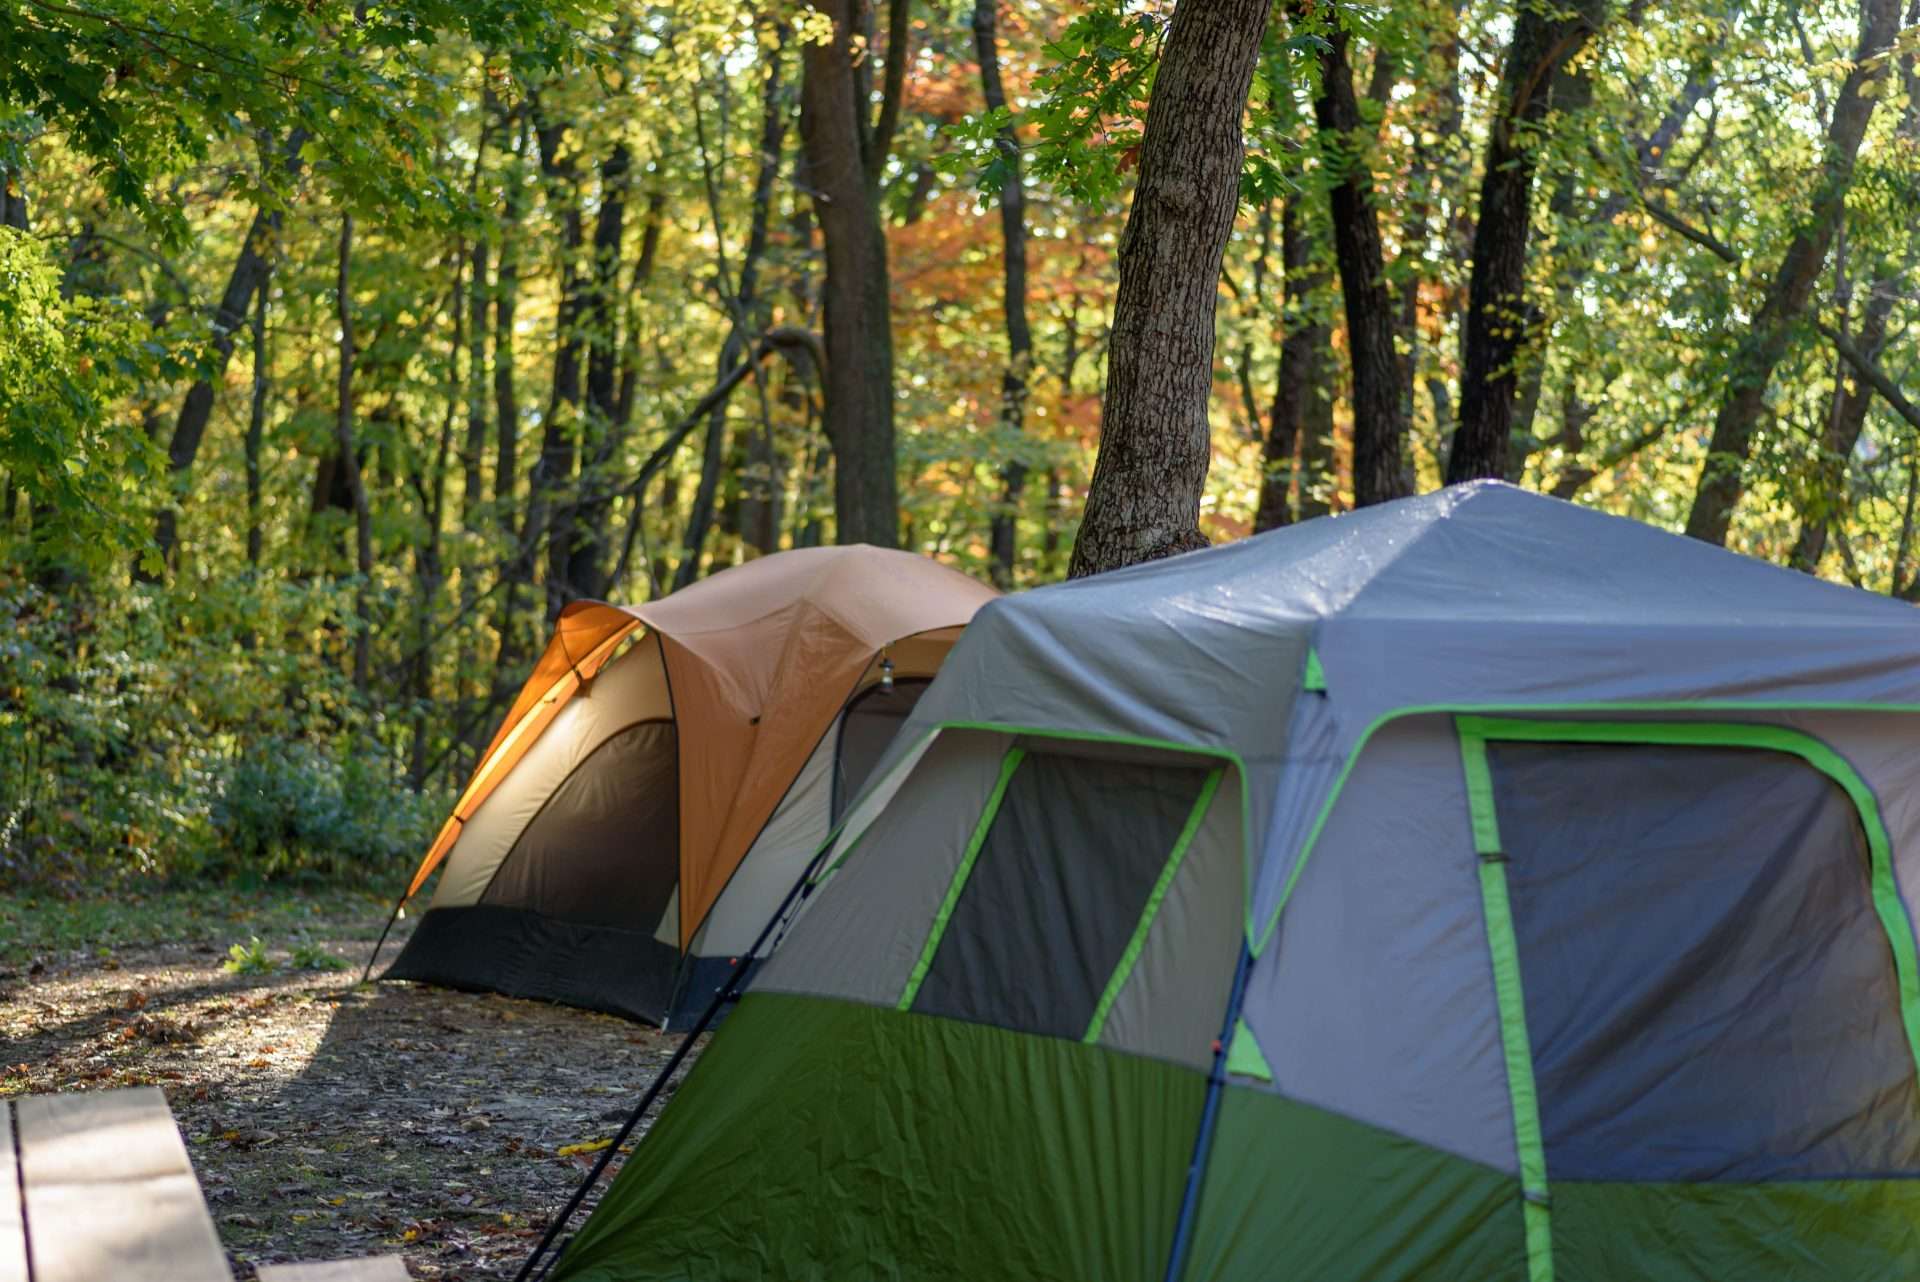 Two tents set up in Washington forest